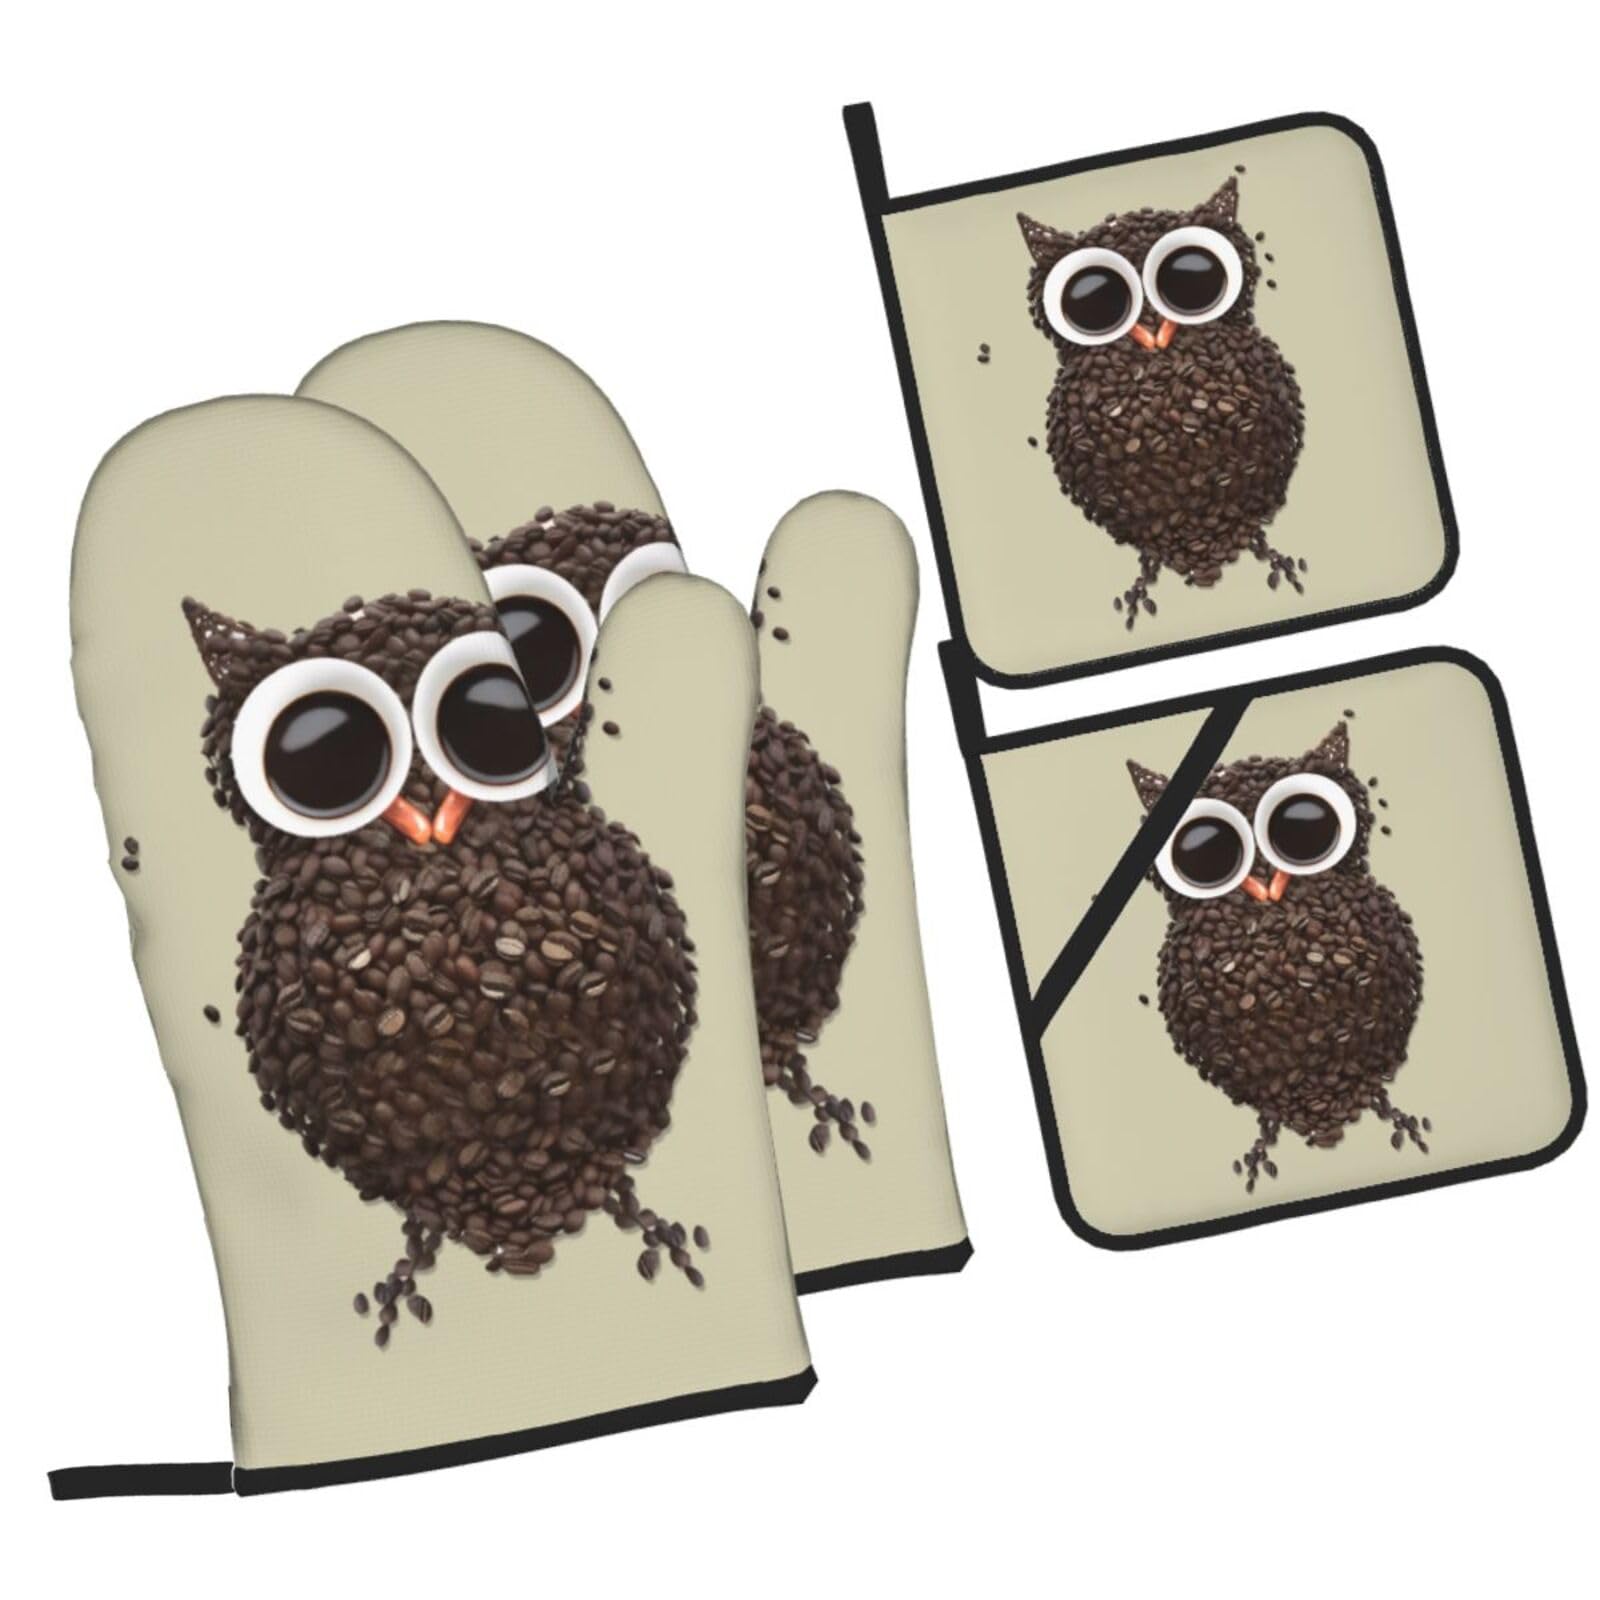 Jatcre Cute Owl Oven Mitts and Pot Holders Sets Coffee Printed Oven Gloves and Hot Pads Heat Resistant Potholder Gloves Oven Mitt 4 Piece Set for Kitchen Cooking Baking Grilling